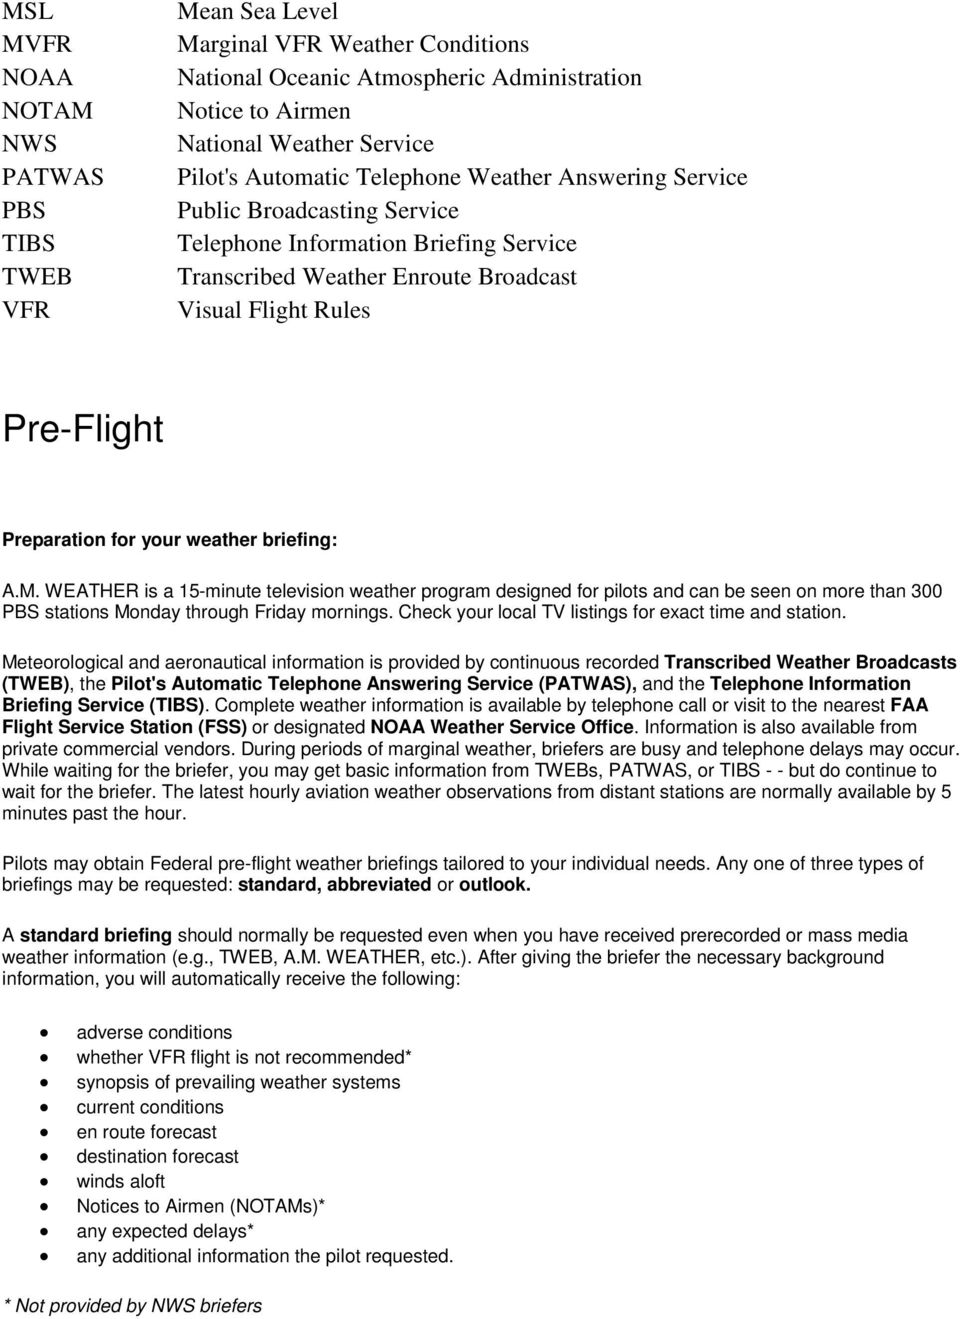 A Pilots Guide To Aviation Weather Services Pdf